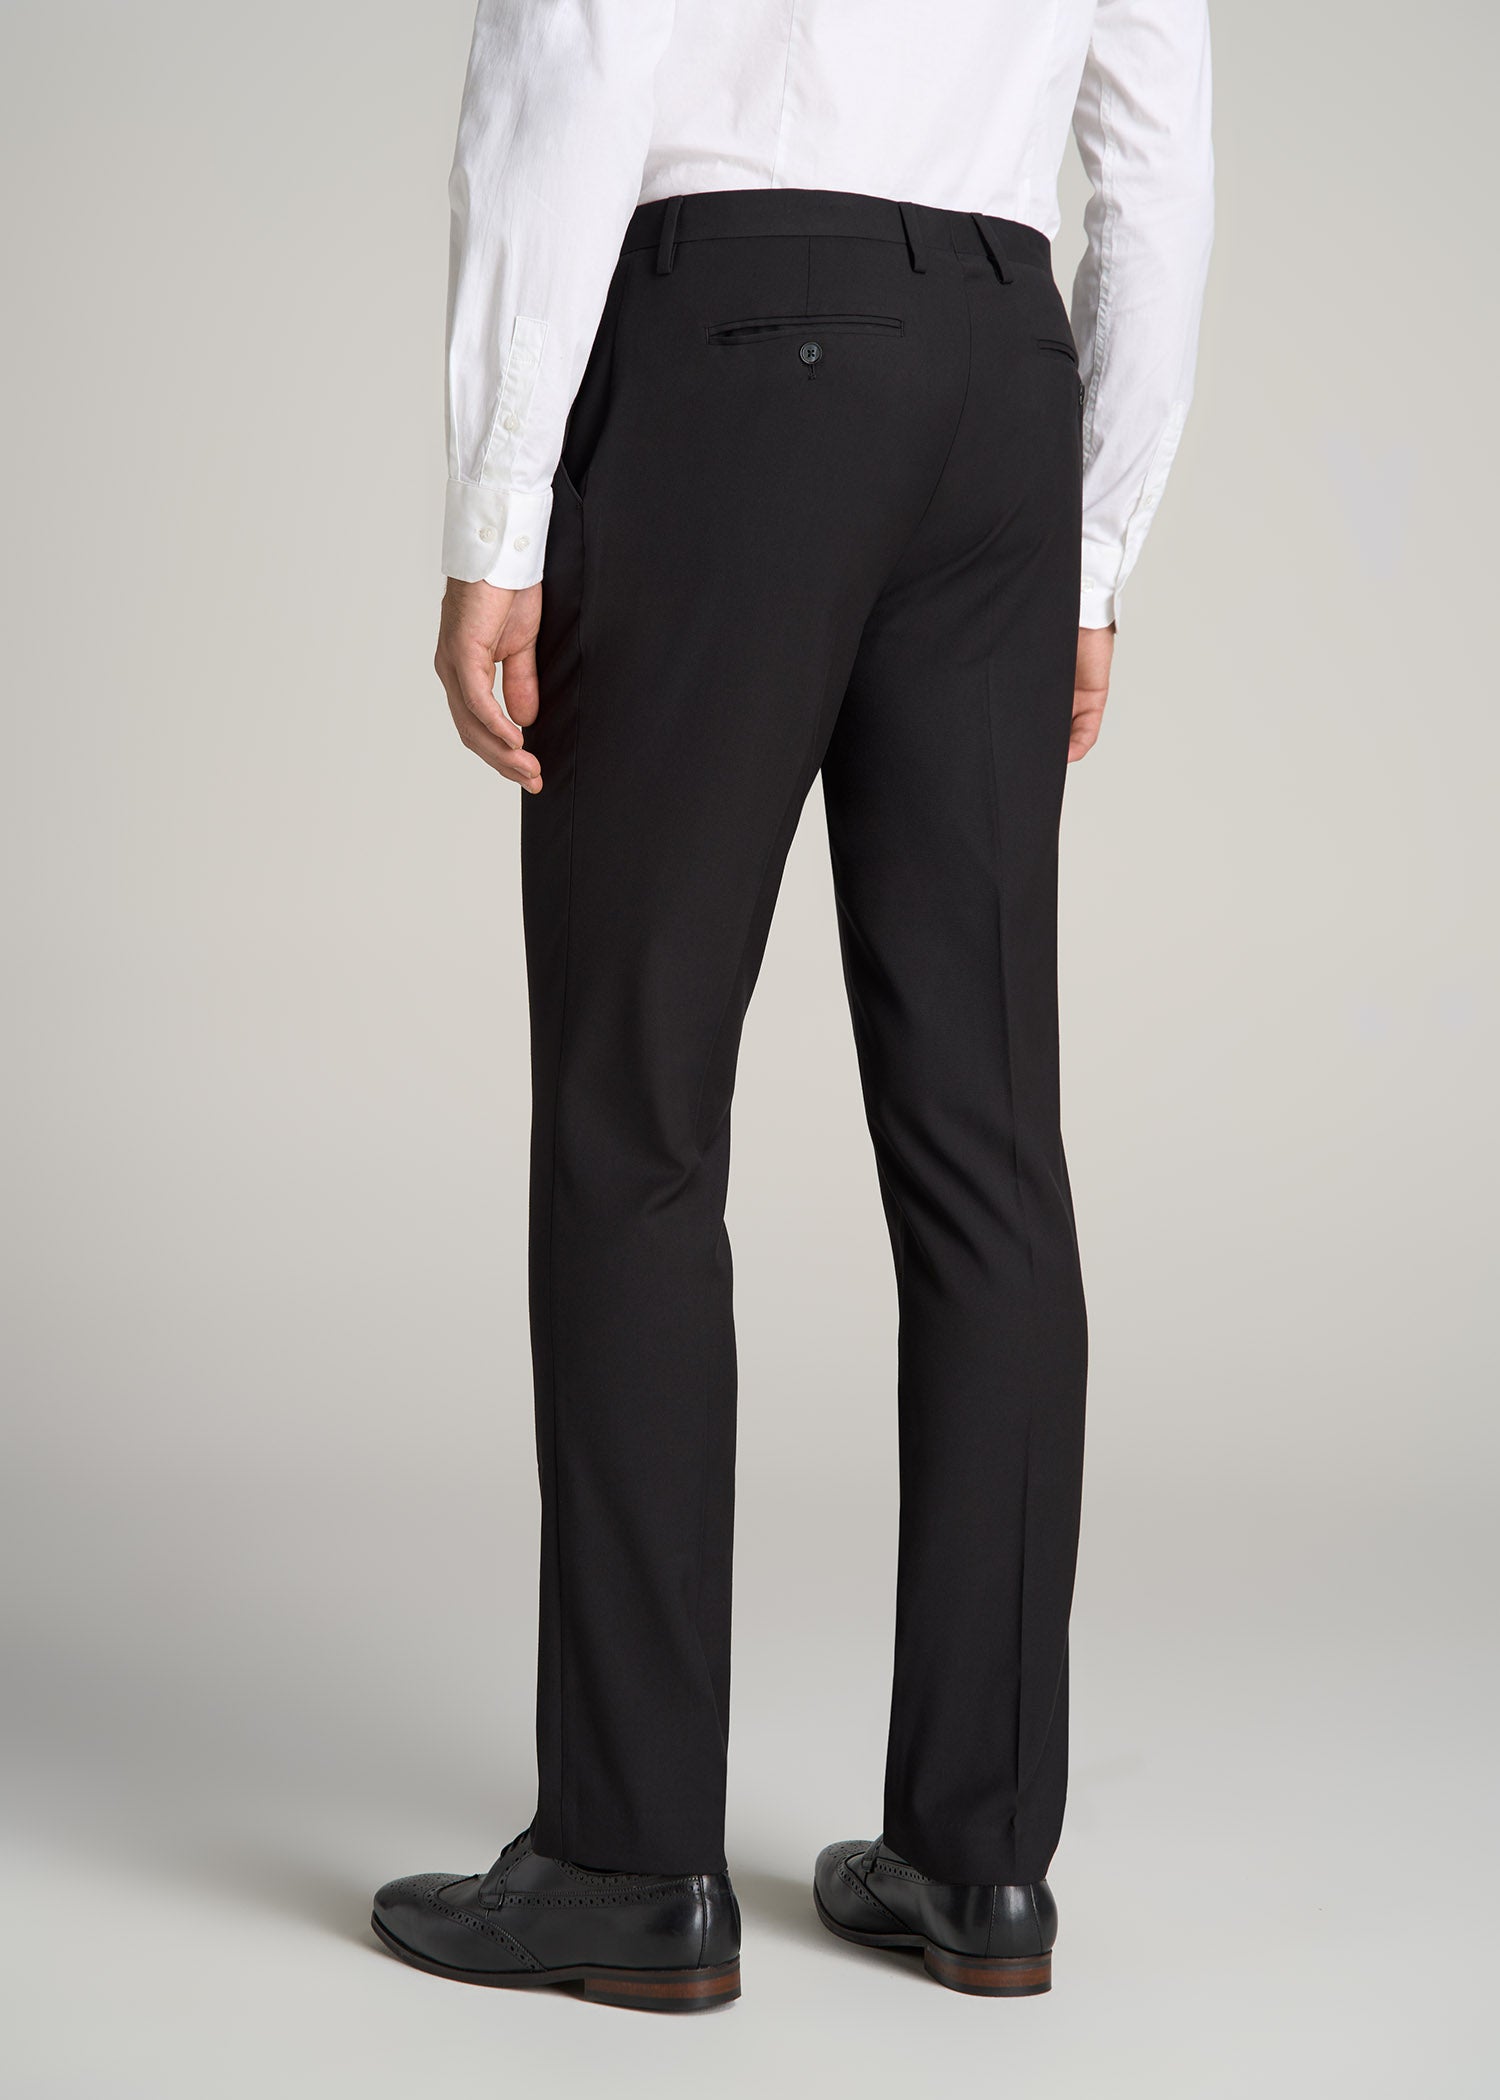 The Ultimate Black Tailored Fit Suit Trousers